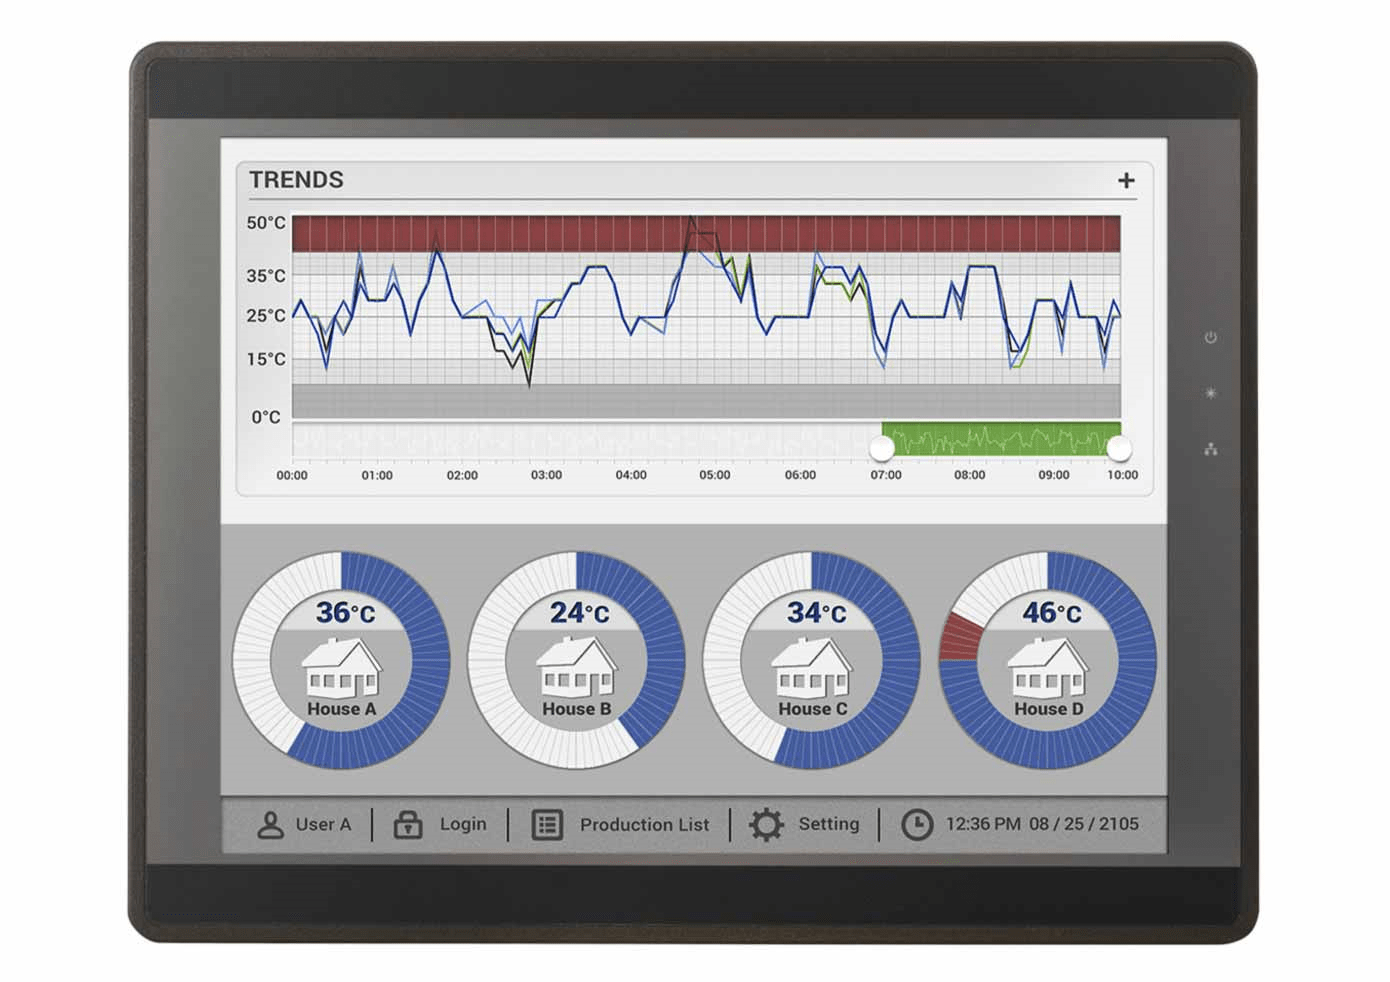 15 inch Advanced HMI with Touchscreen and Graphic User Interface